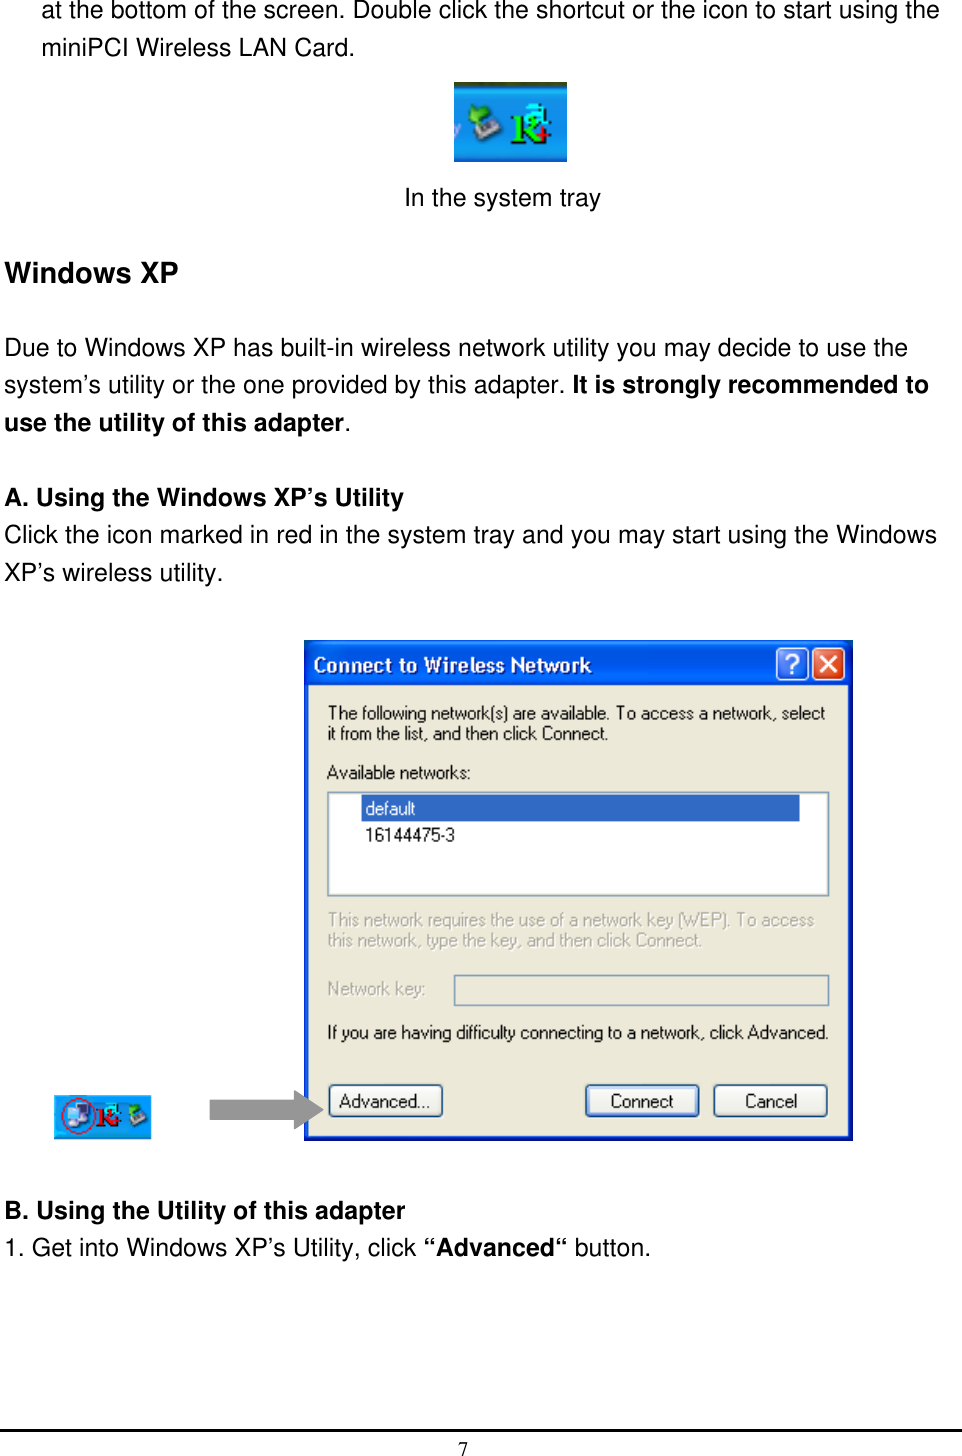  at the bottom of the screen. Double click the shortcut or the icon to start using the miniPCI Wireless LAN Card.            In the system tray  Windows XP  Due to Windows XP has built-in wireless network utility you may decide to use the system’s utility or the one provided by this adapter. It is strongly recommended to use the utility of this adapter.  A. Using the Windows XP’s Utility Click the icon marked in red in the system tray and you may start using the Windows XP’s wireless utility.         B. Using the Utility of this adapter 1. Get into Windows XP’s Utility, click “Advanced“ button. 7  